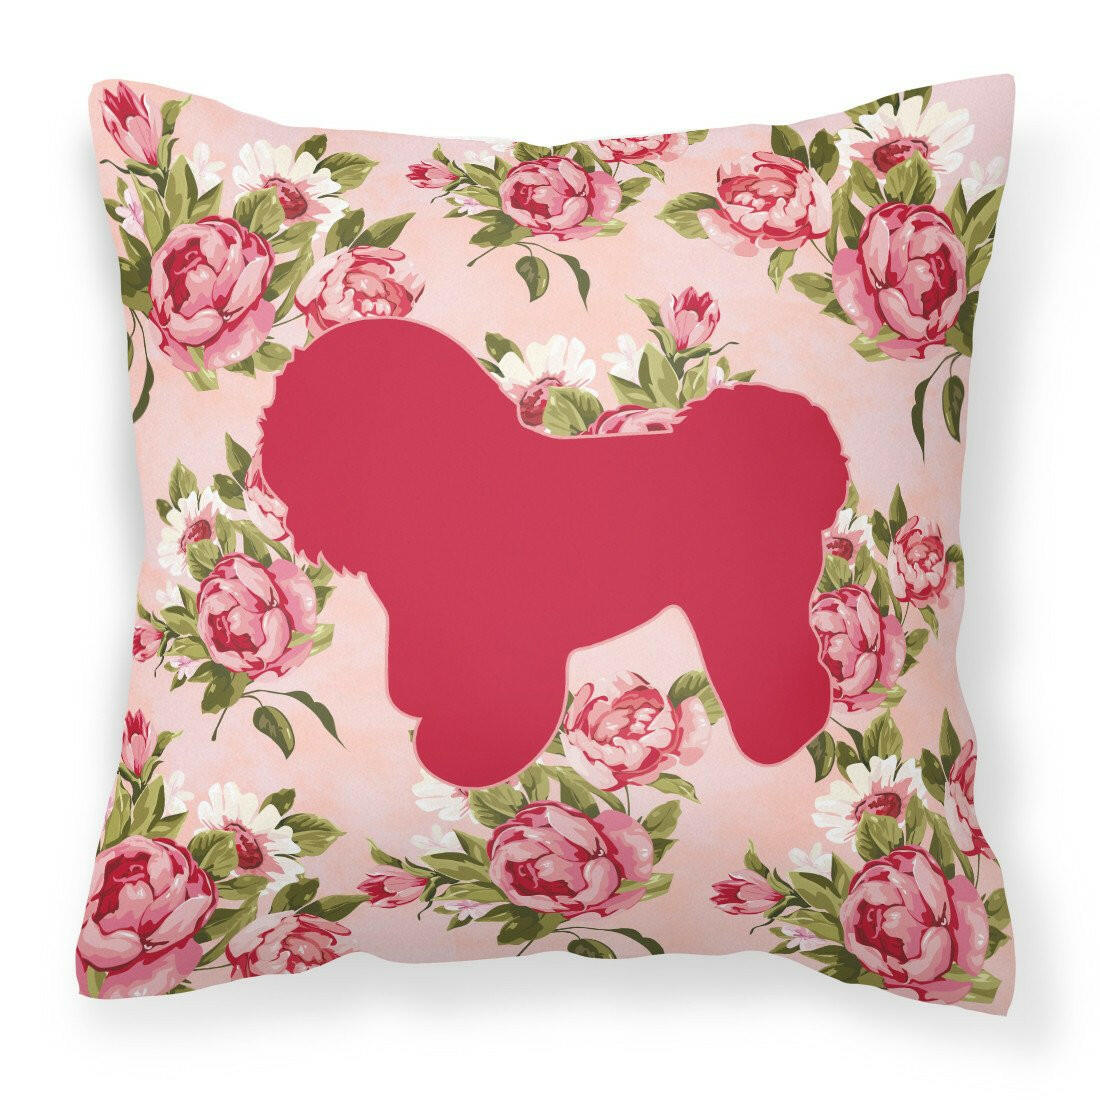 Bichon Frise Shabby Chic Pink Roses  Fabric Decorative Pillow BB1107-RS-PK-PW1414 - the-store.com